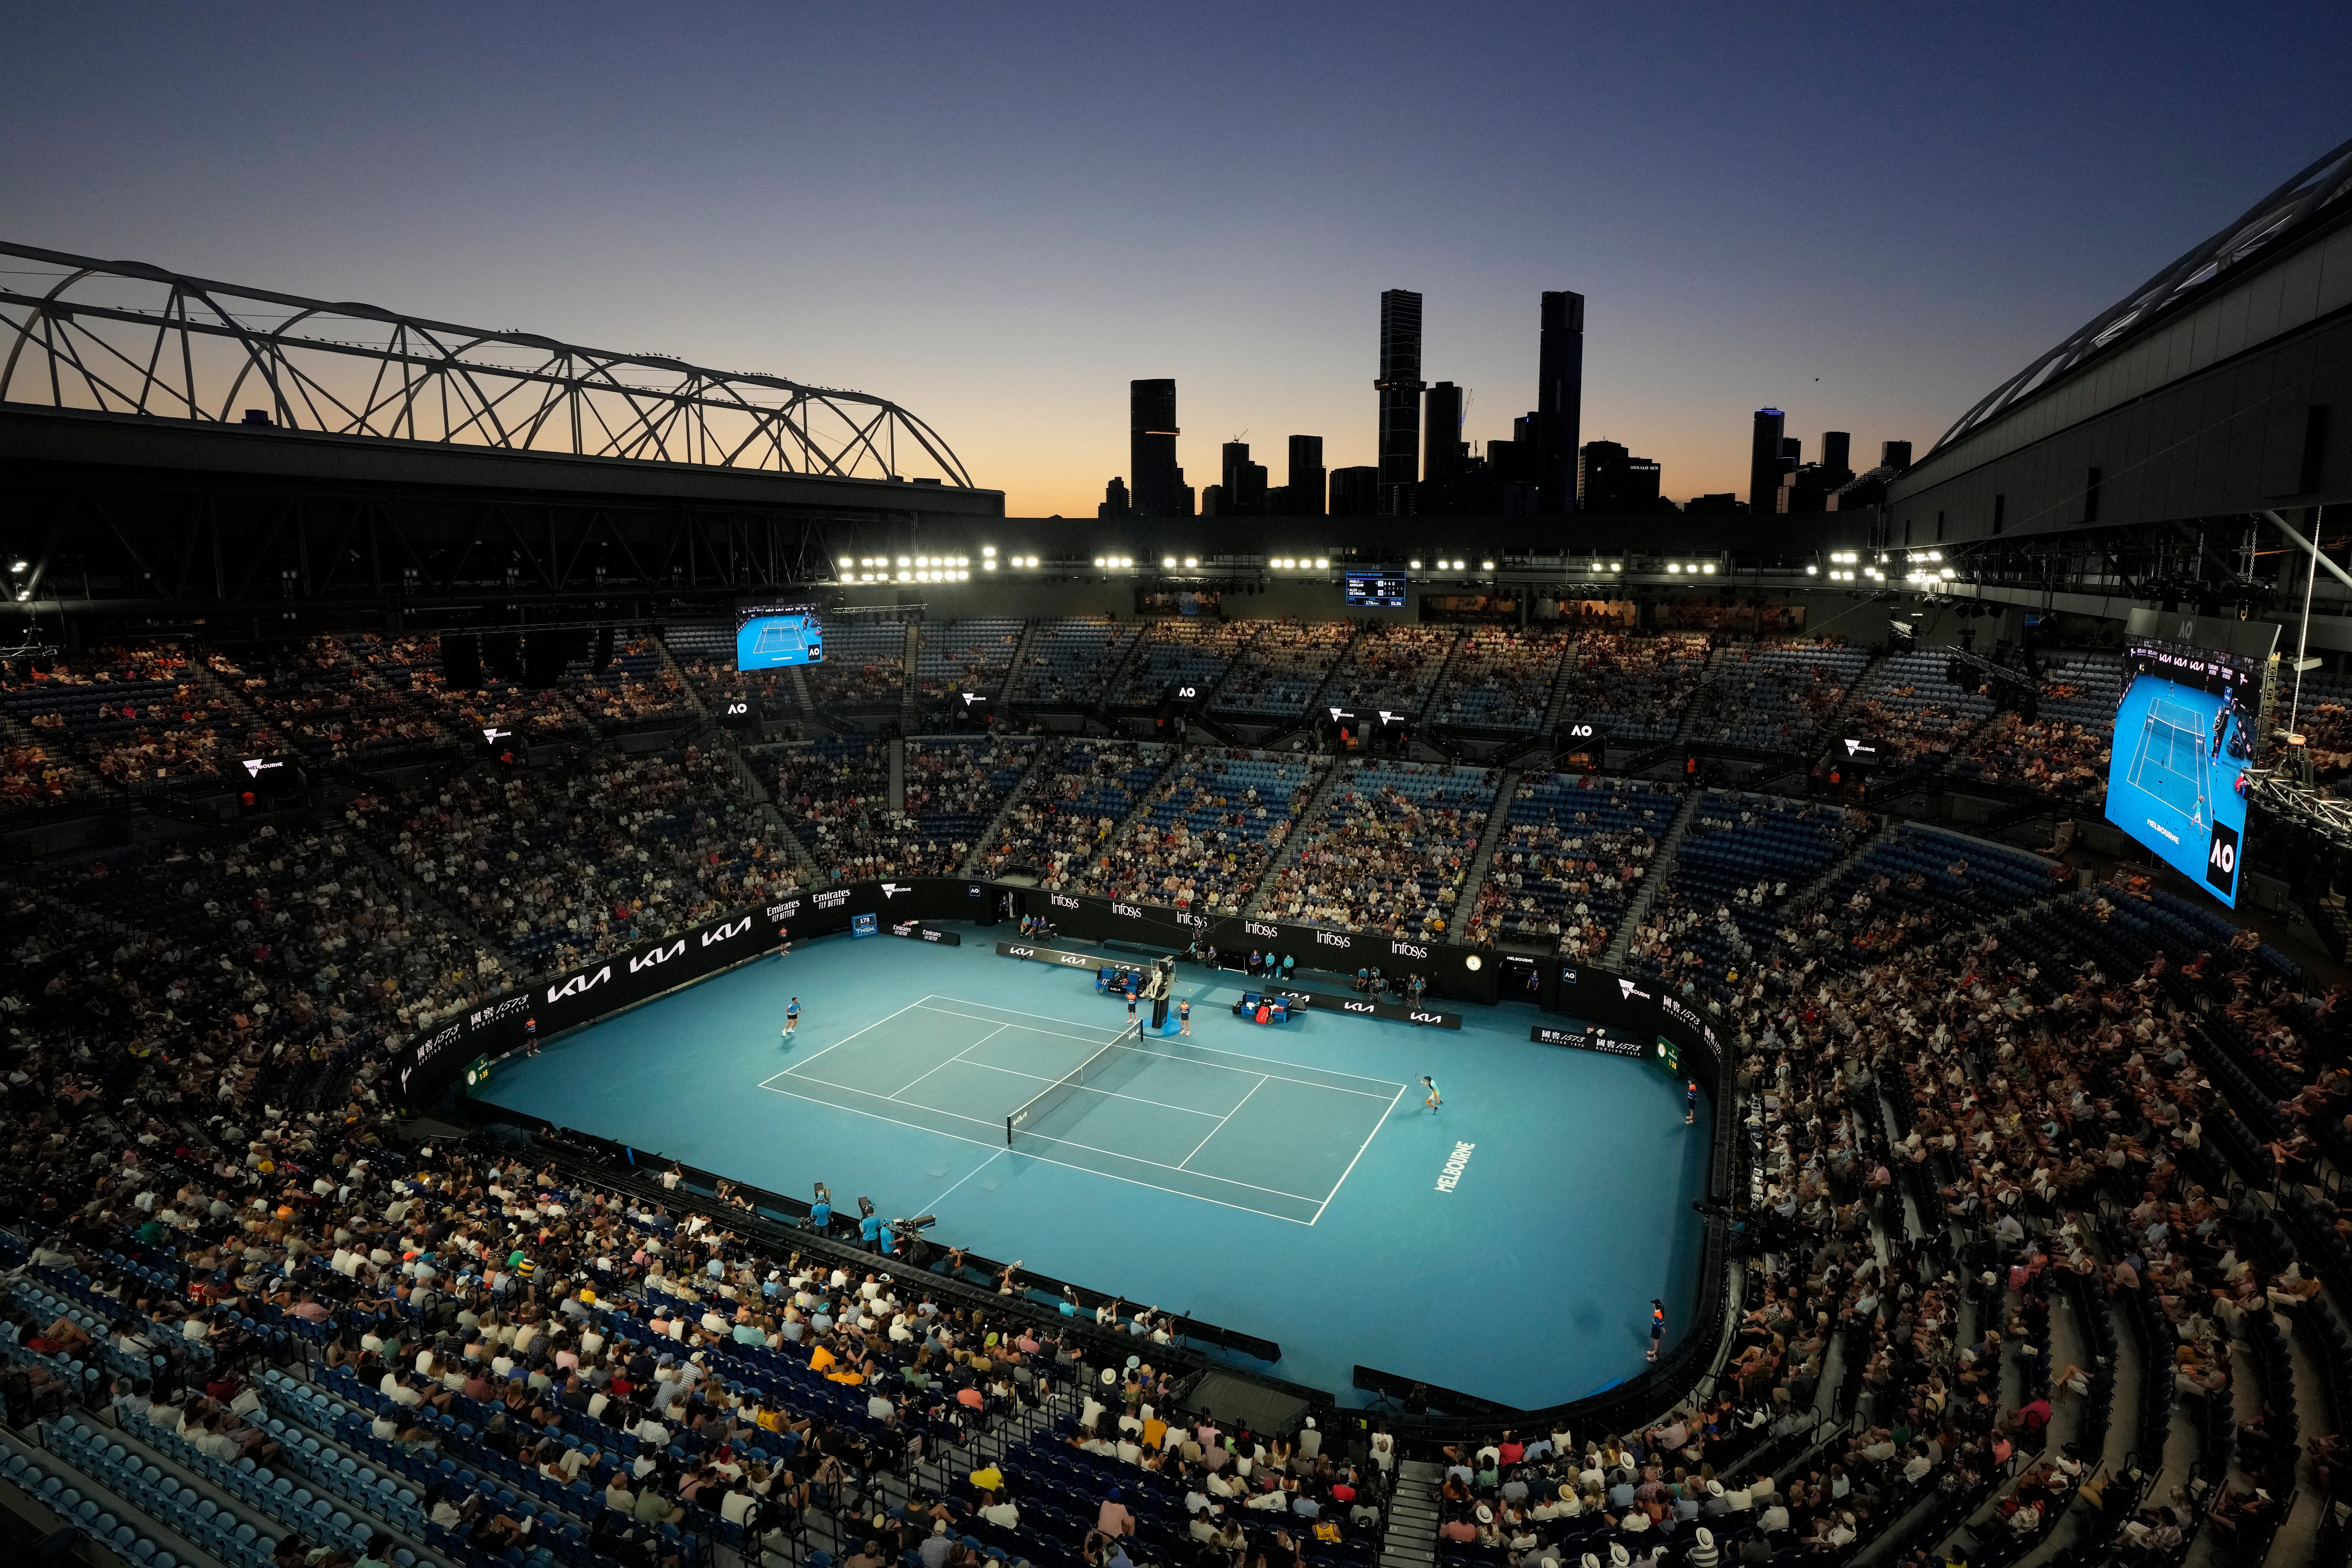 Action Audio is available for all matches on Rod Laver Arena (Simon Baker/AP)